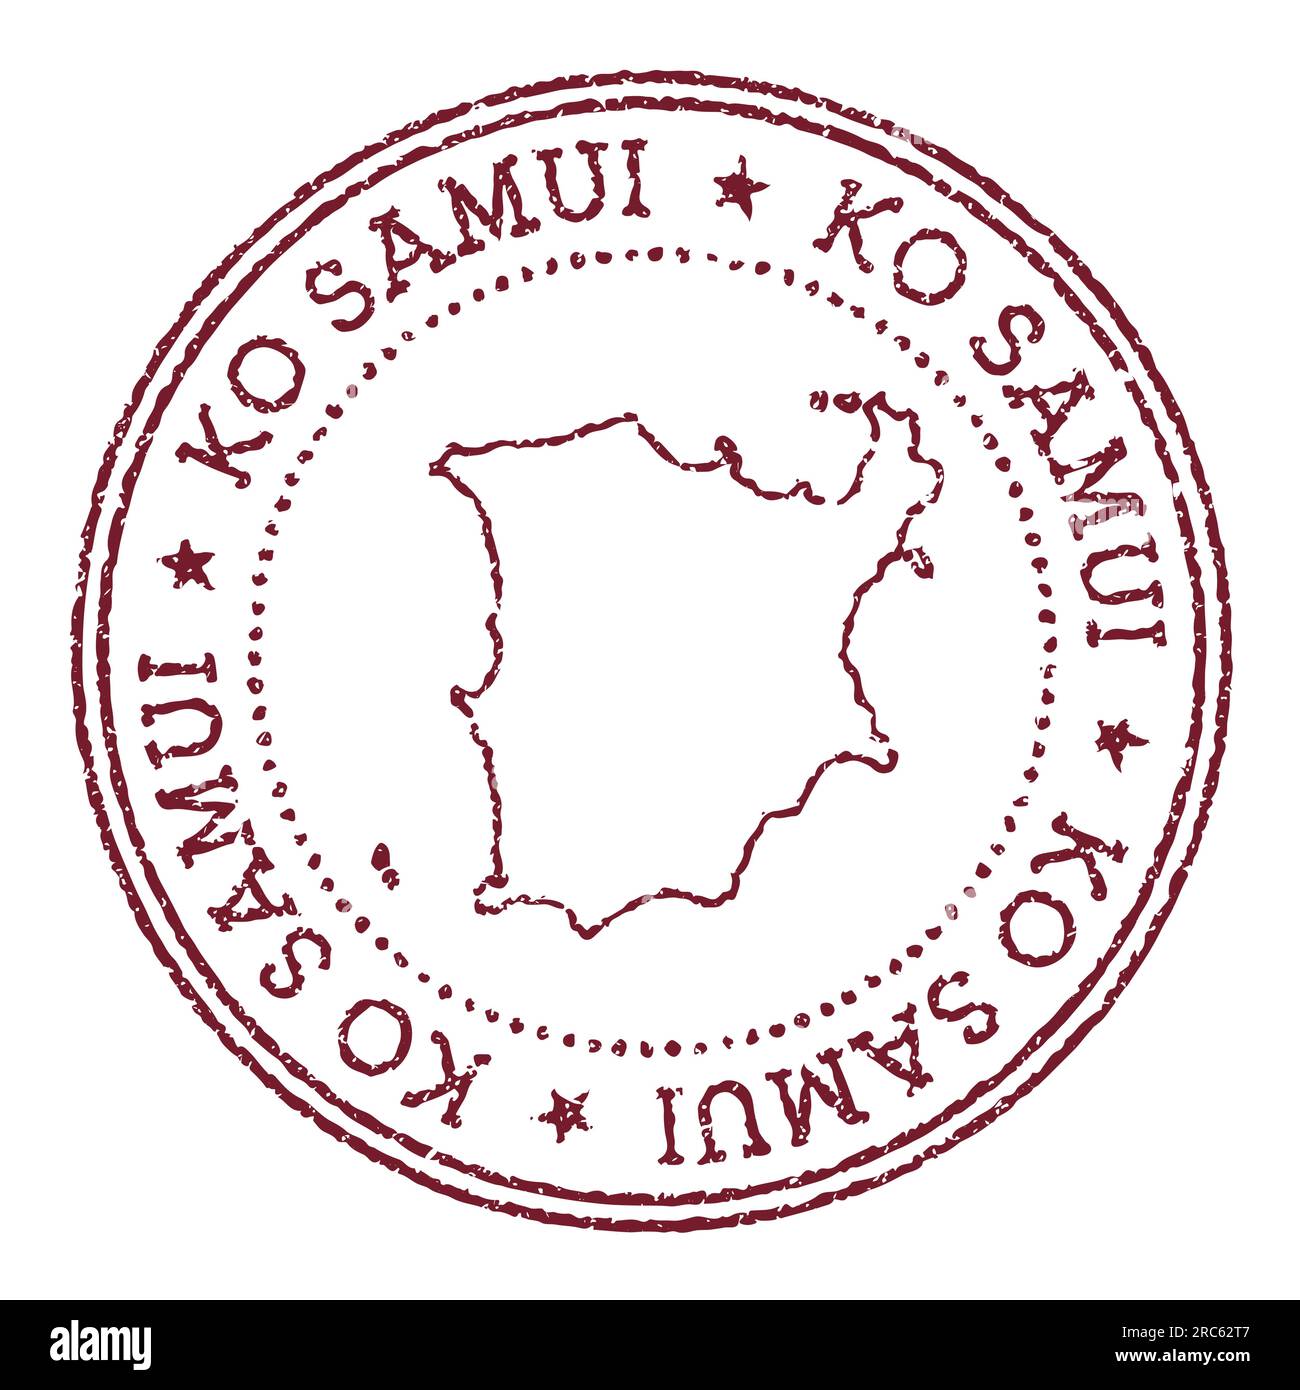 Ko Samui round rubber stamp with island map. Vintage red passport stamp with circular text and stars, vector illustration. Stock Vector